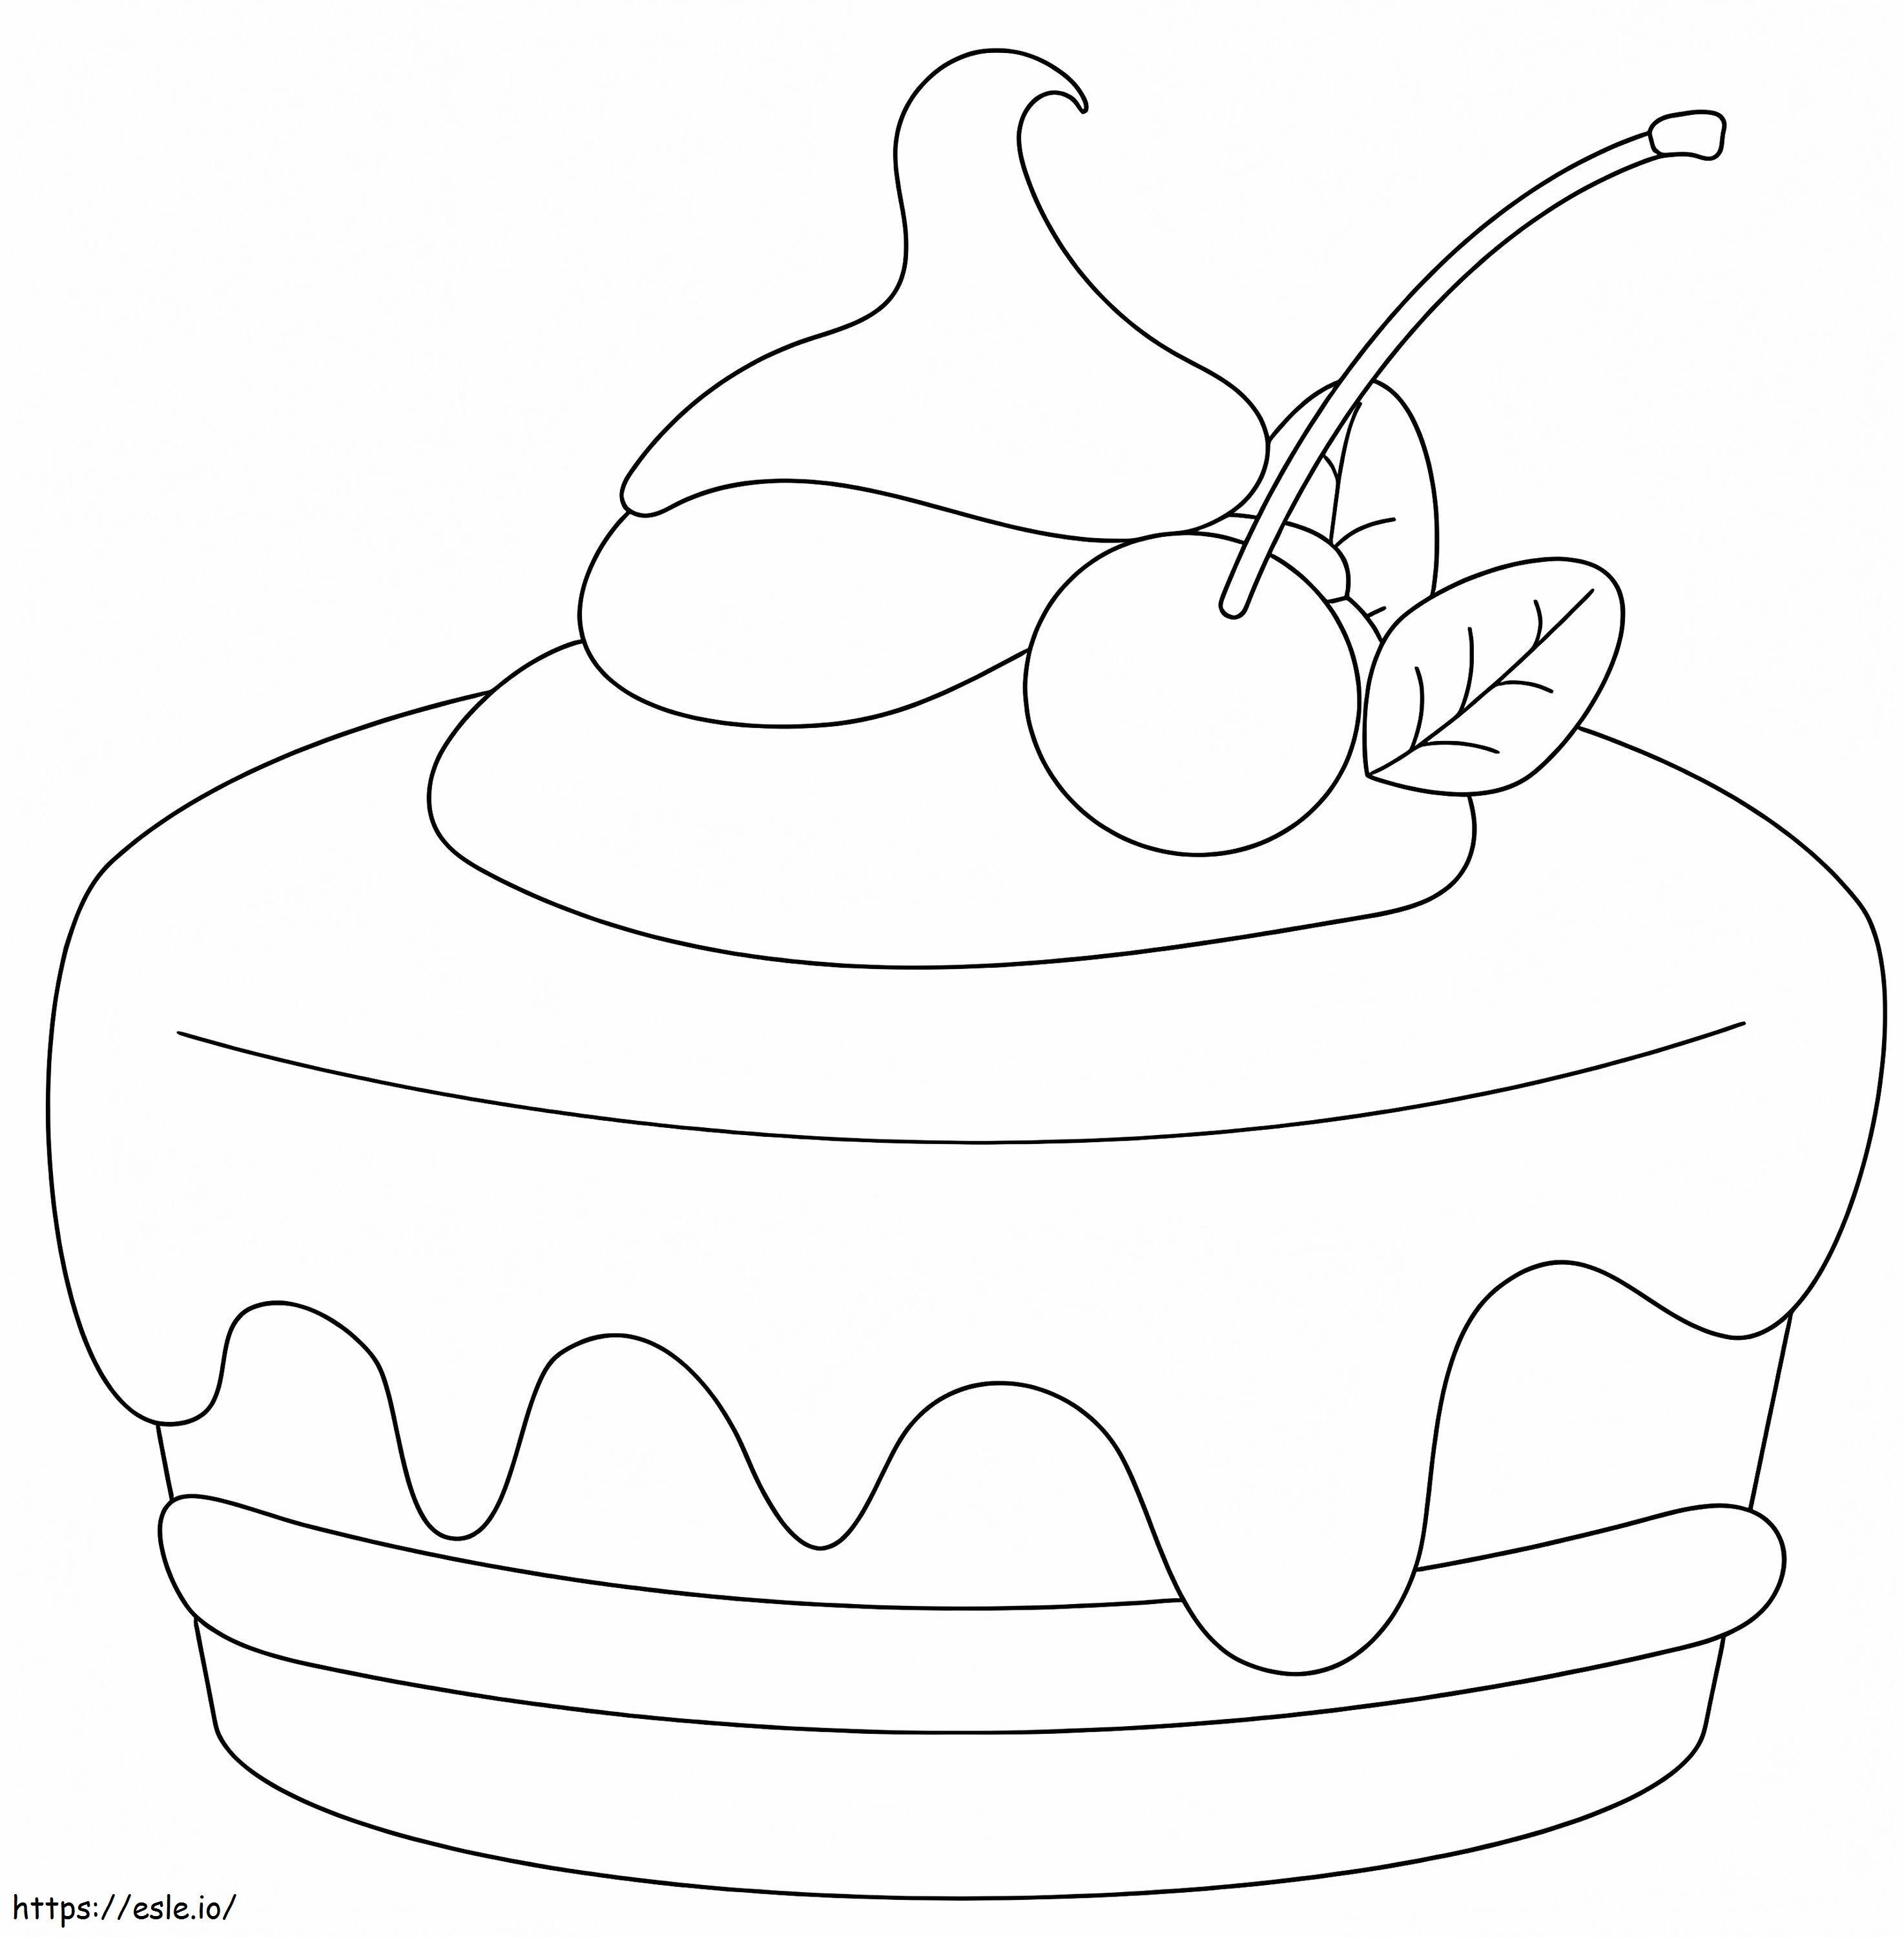 Ice Cream Cake For Kids coloring page